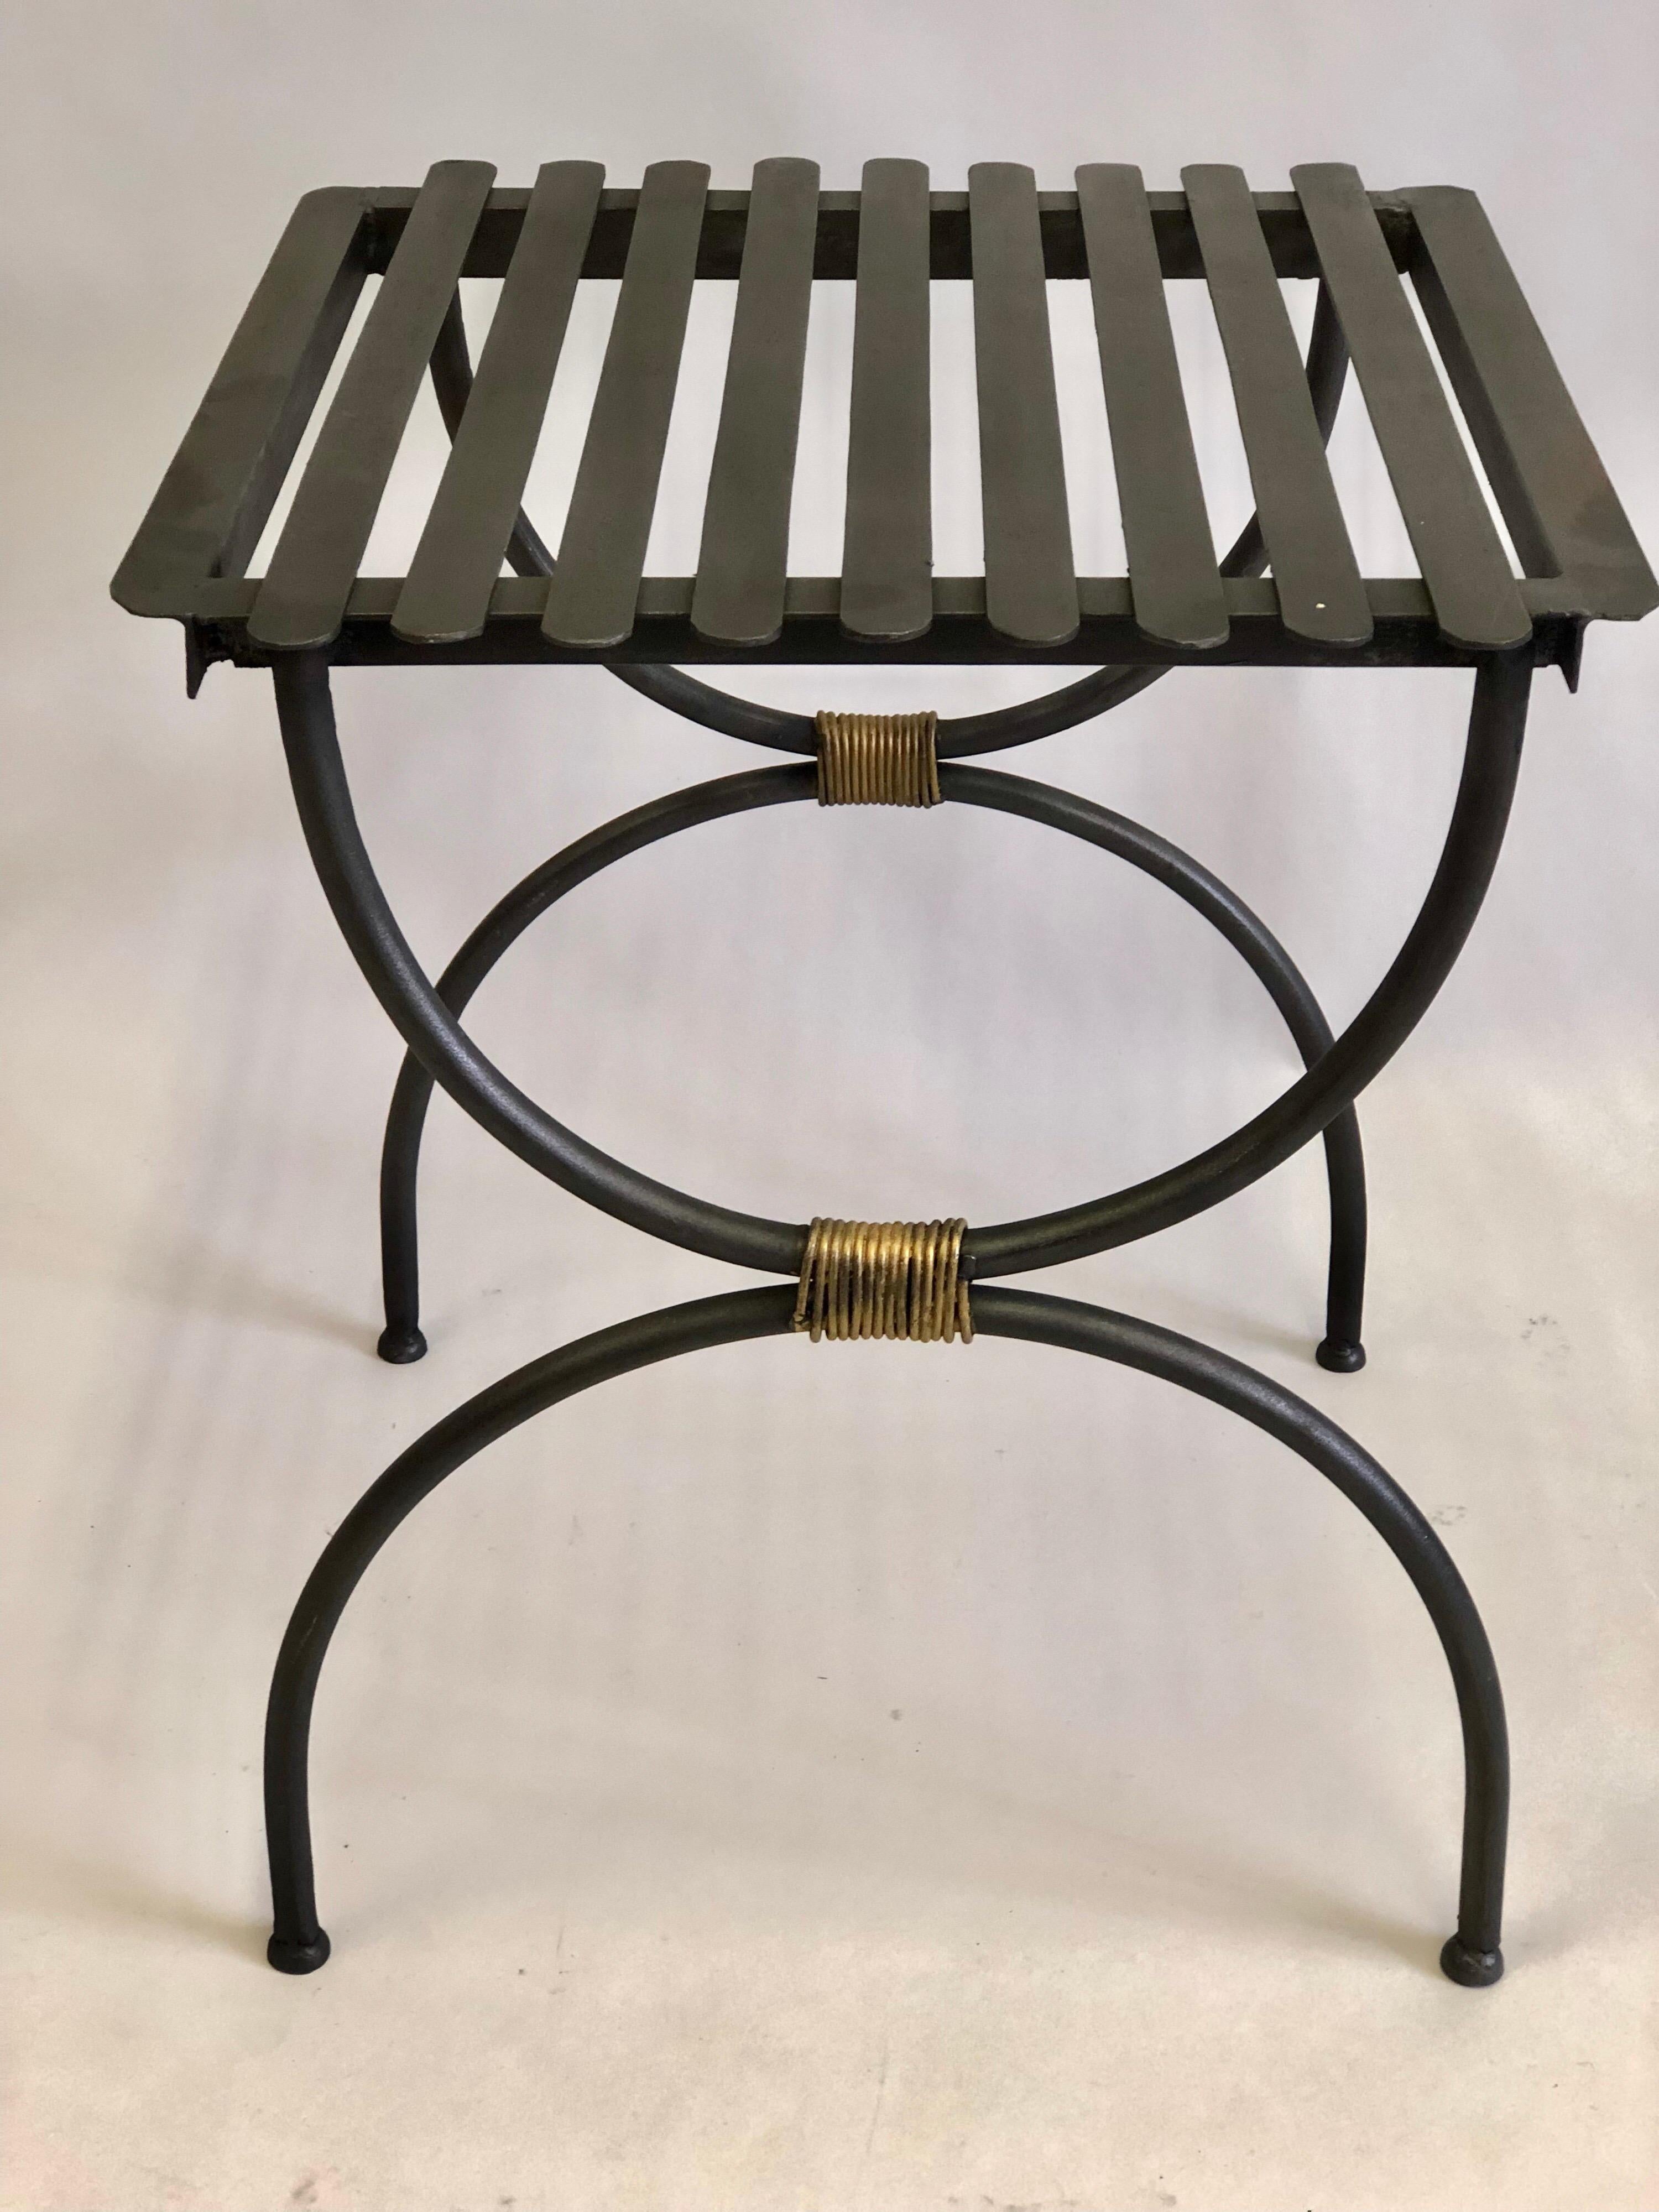 Pair of French Modern Neoclassical Iron Benches / Luggage Racks  In Good Condition For Sale In New York, NY